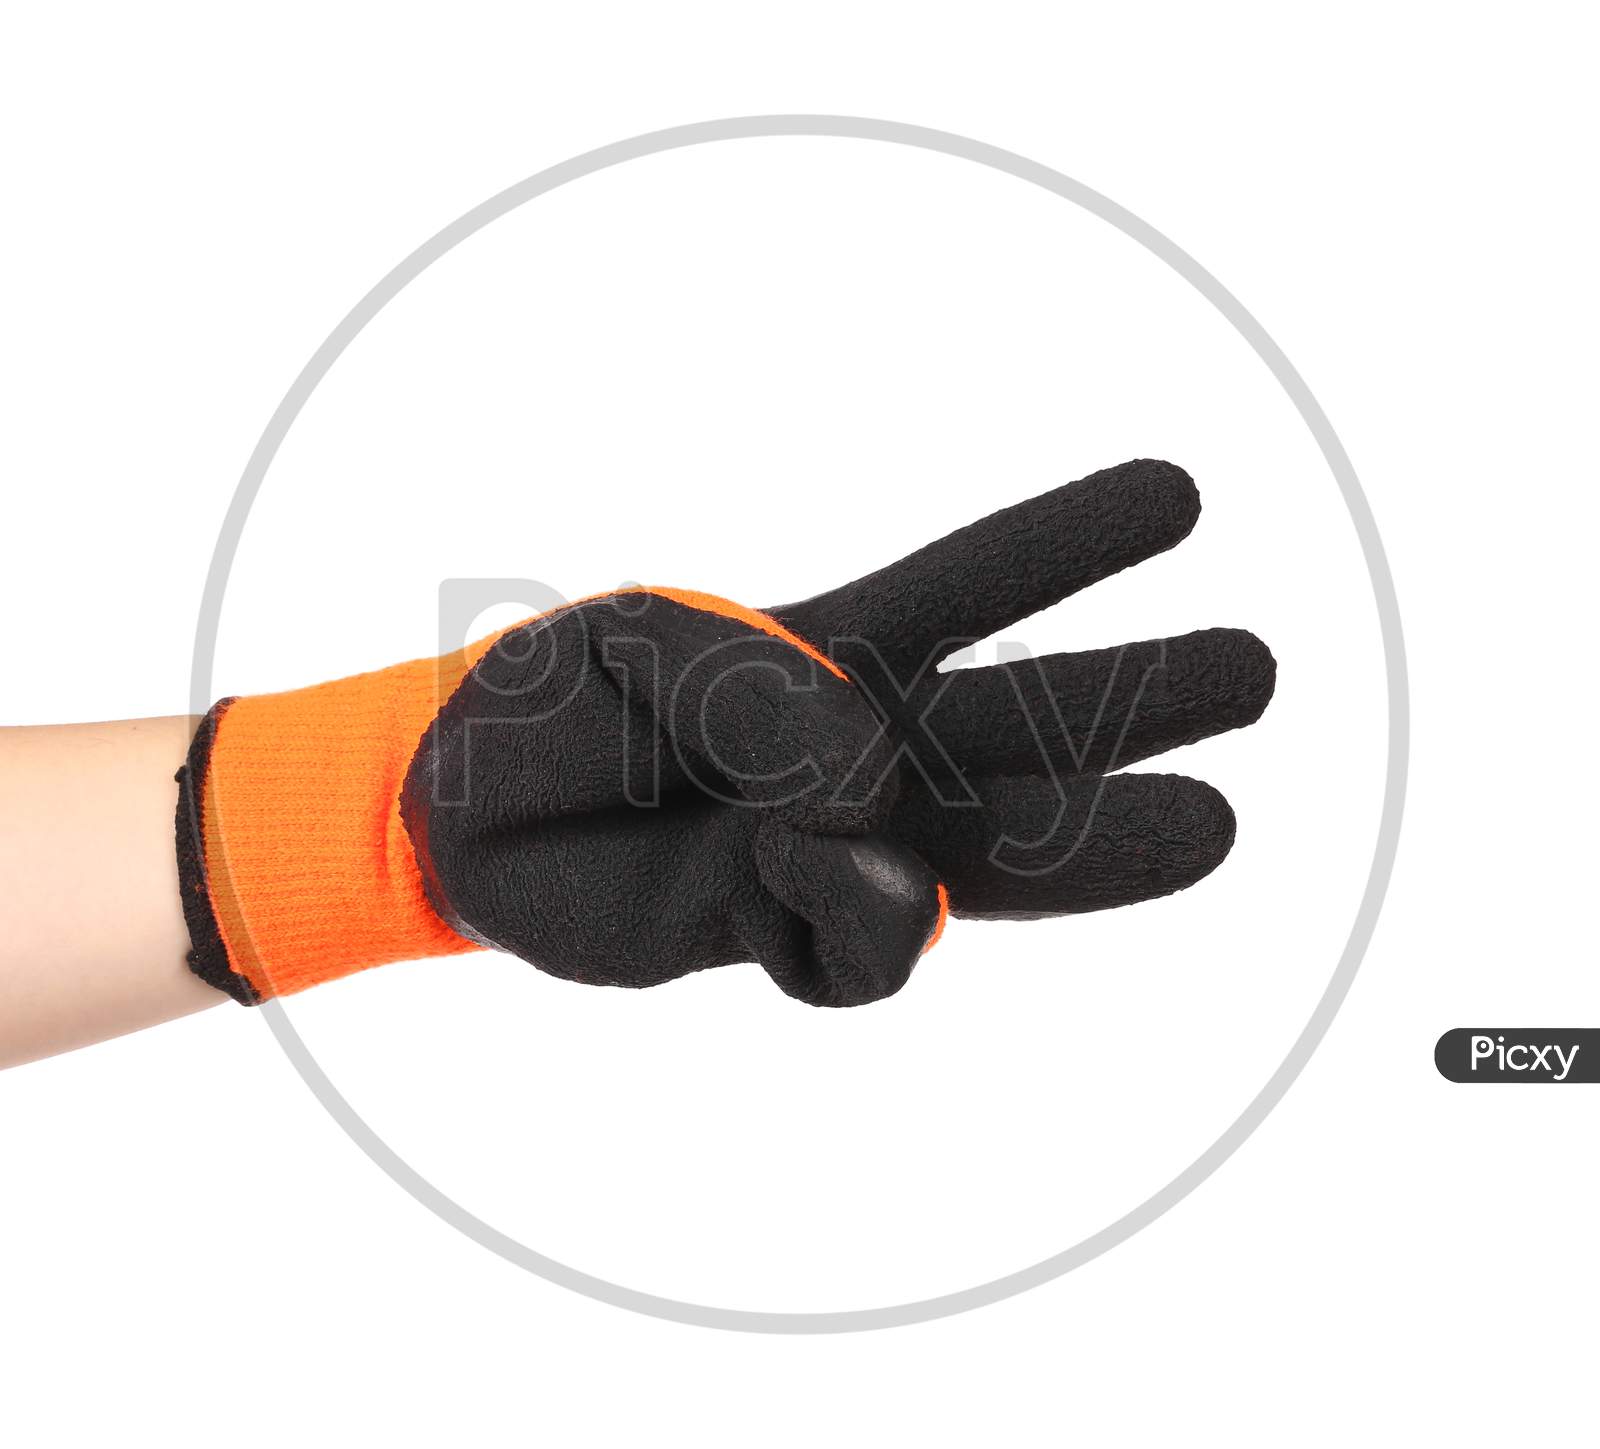 Black Rubber Glove On Hand. Isolated On A White Background.